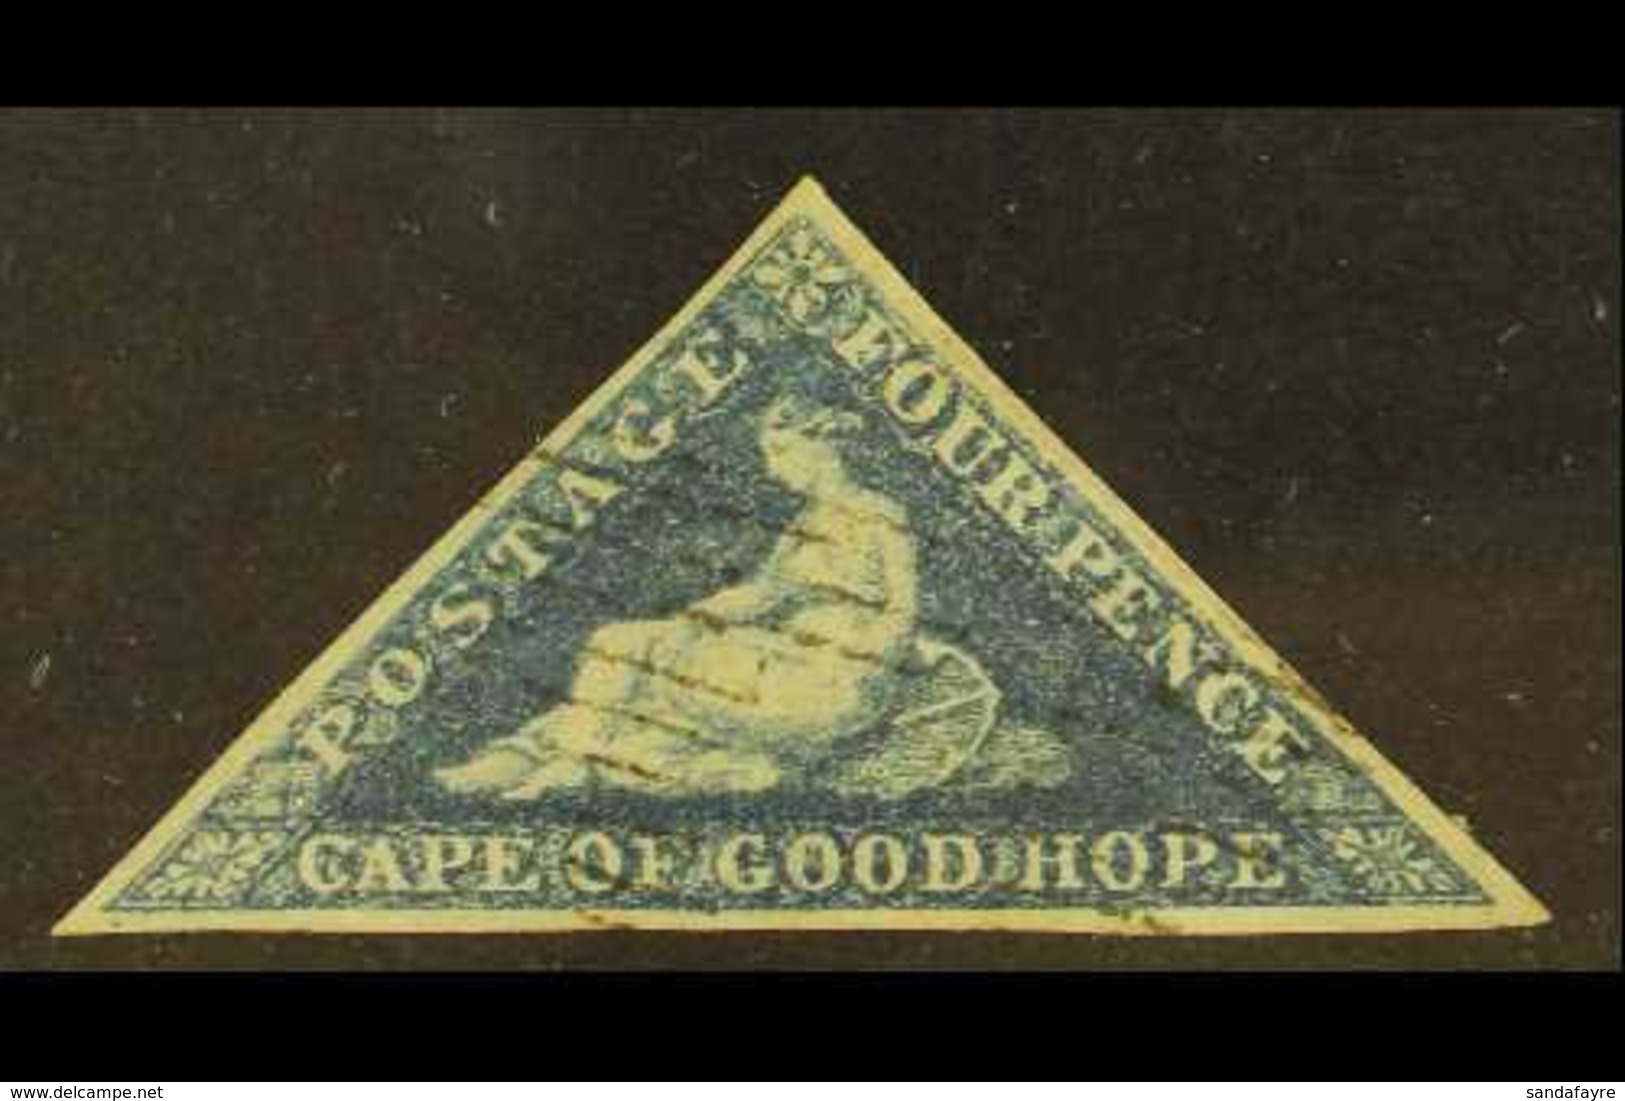 CAPE OF GOOD HOPE 1863-64 4d Blue, SG 19a, Used With 3 Clear Margins (1 Stamp) For More Images, Please Visit Http://www. - Ohne Zuordnung